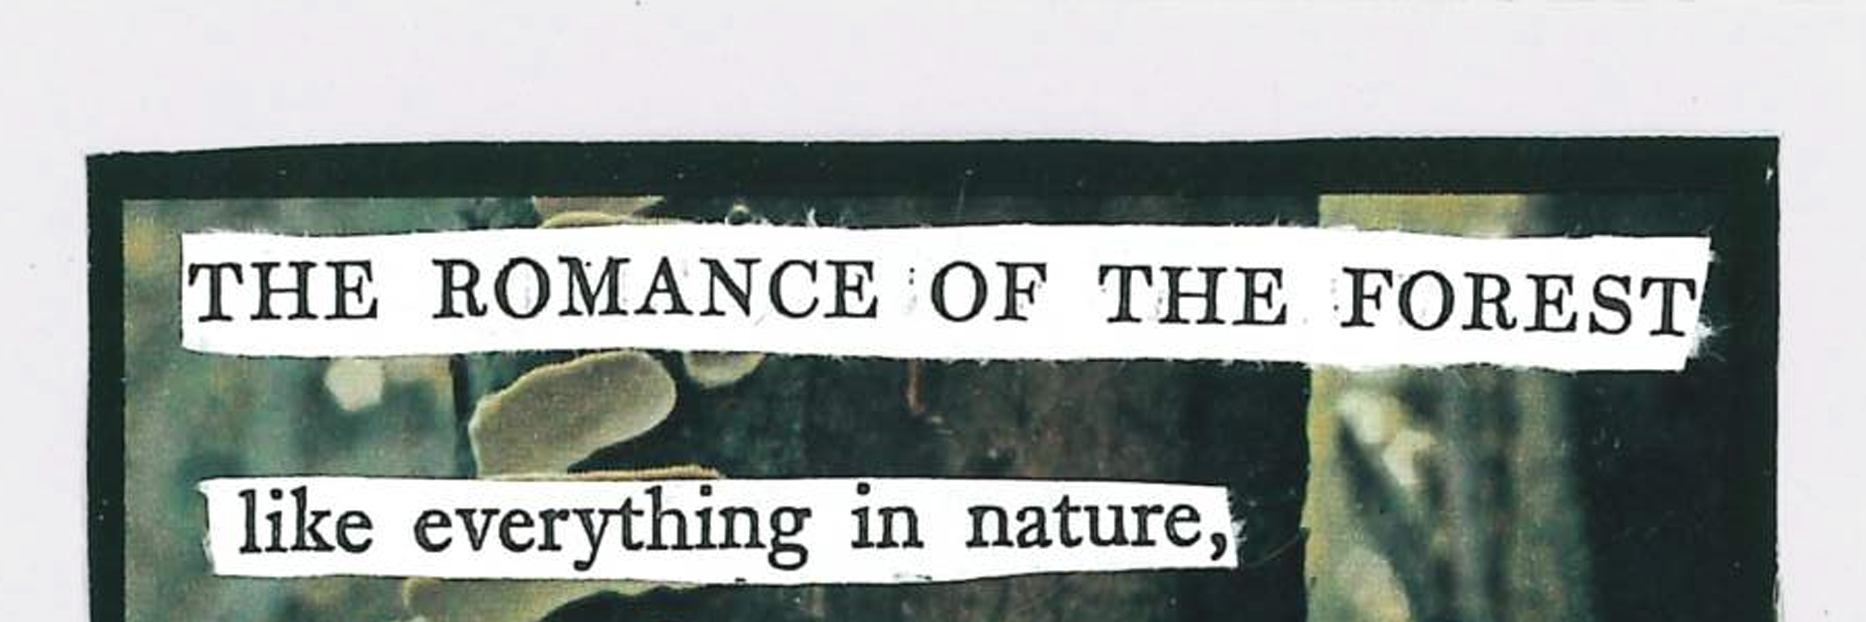 Headline of THE ROMANCE OF THE FOREST as seen in Pathos Litmag, 22'/23'.